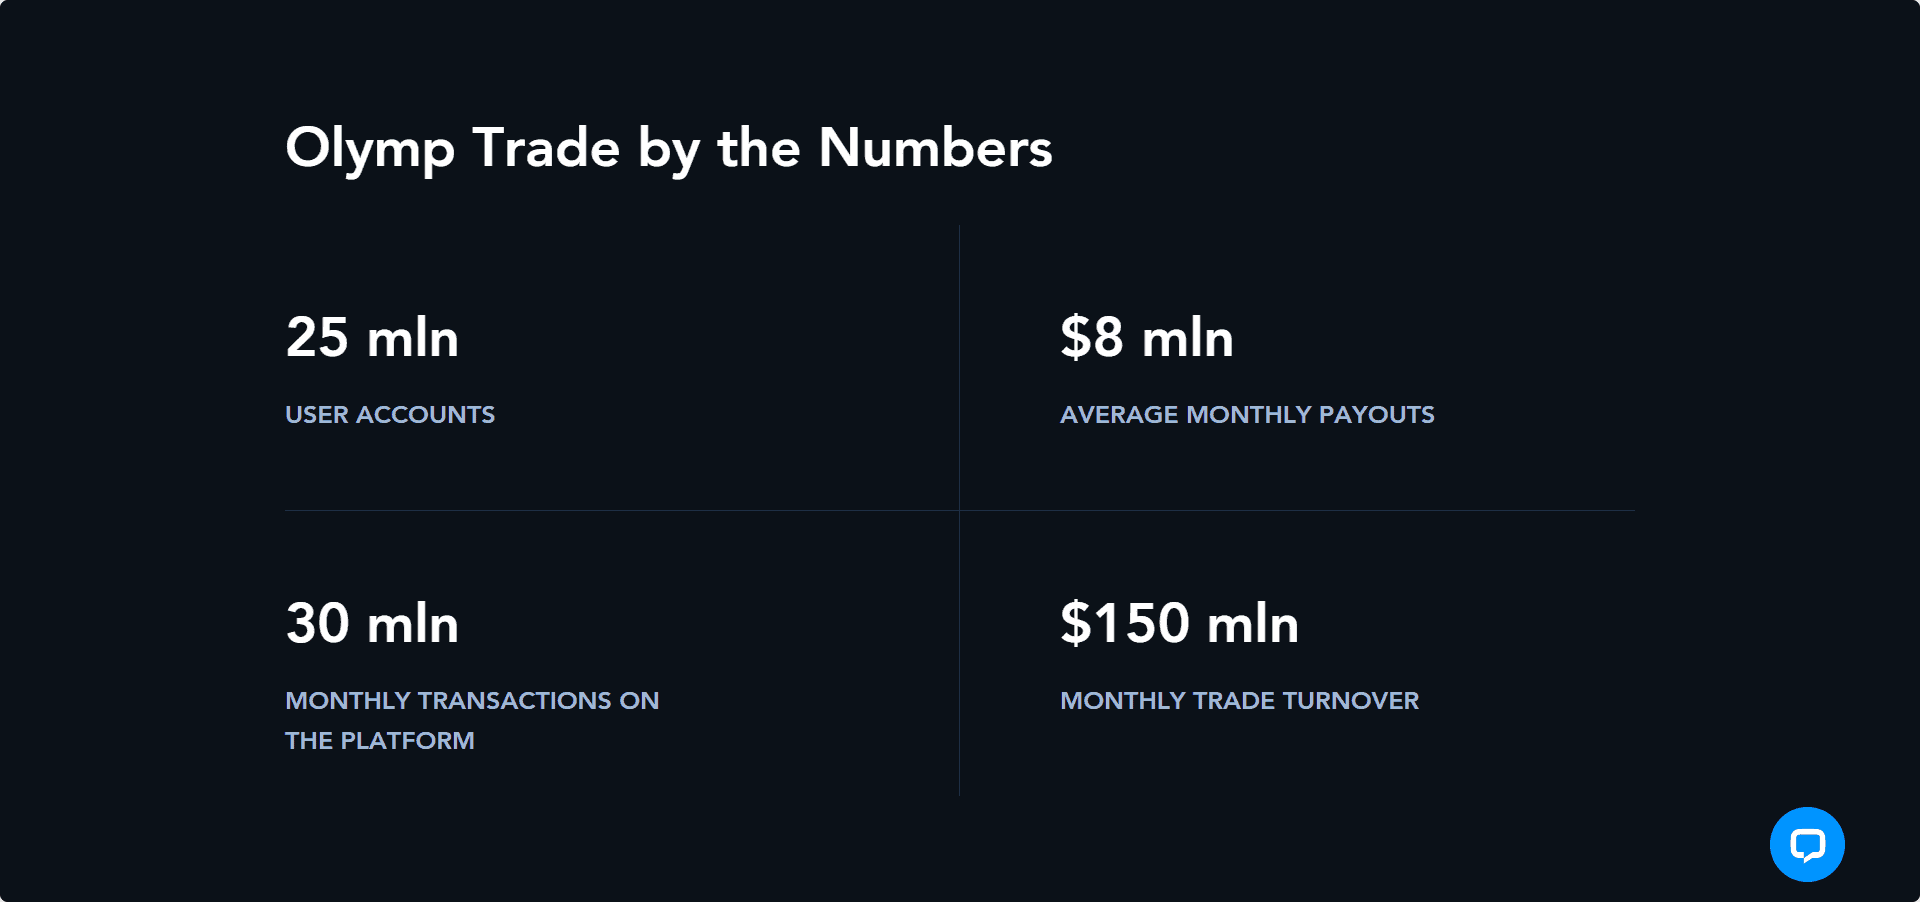 Why Trust Olymp Trade